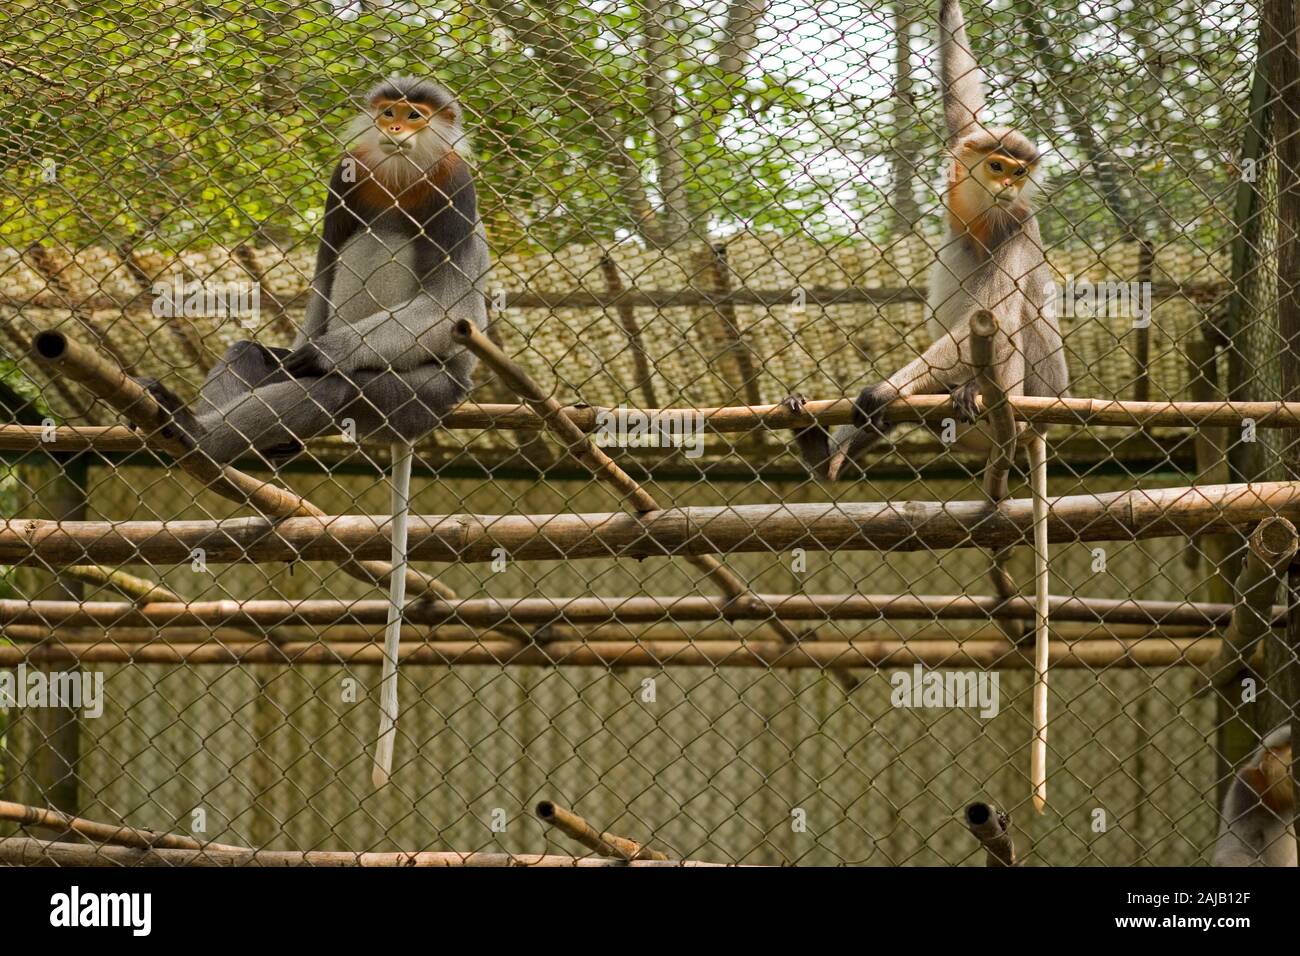 GREY-SHANKED DOUC LANGURS Pygathrix cinereus Confiscated smuggled animals brought together for a captive breeding programme at the Cuc Phuong National Stock Photo